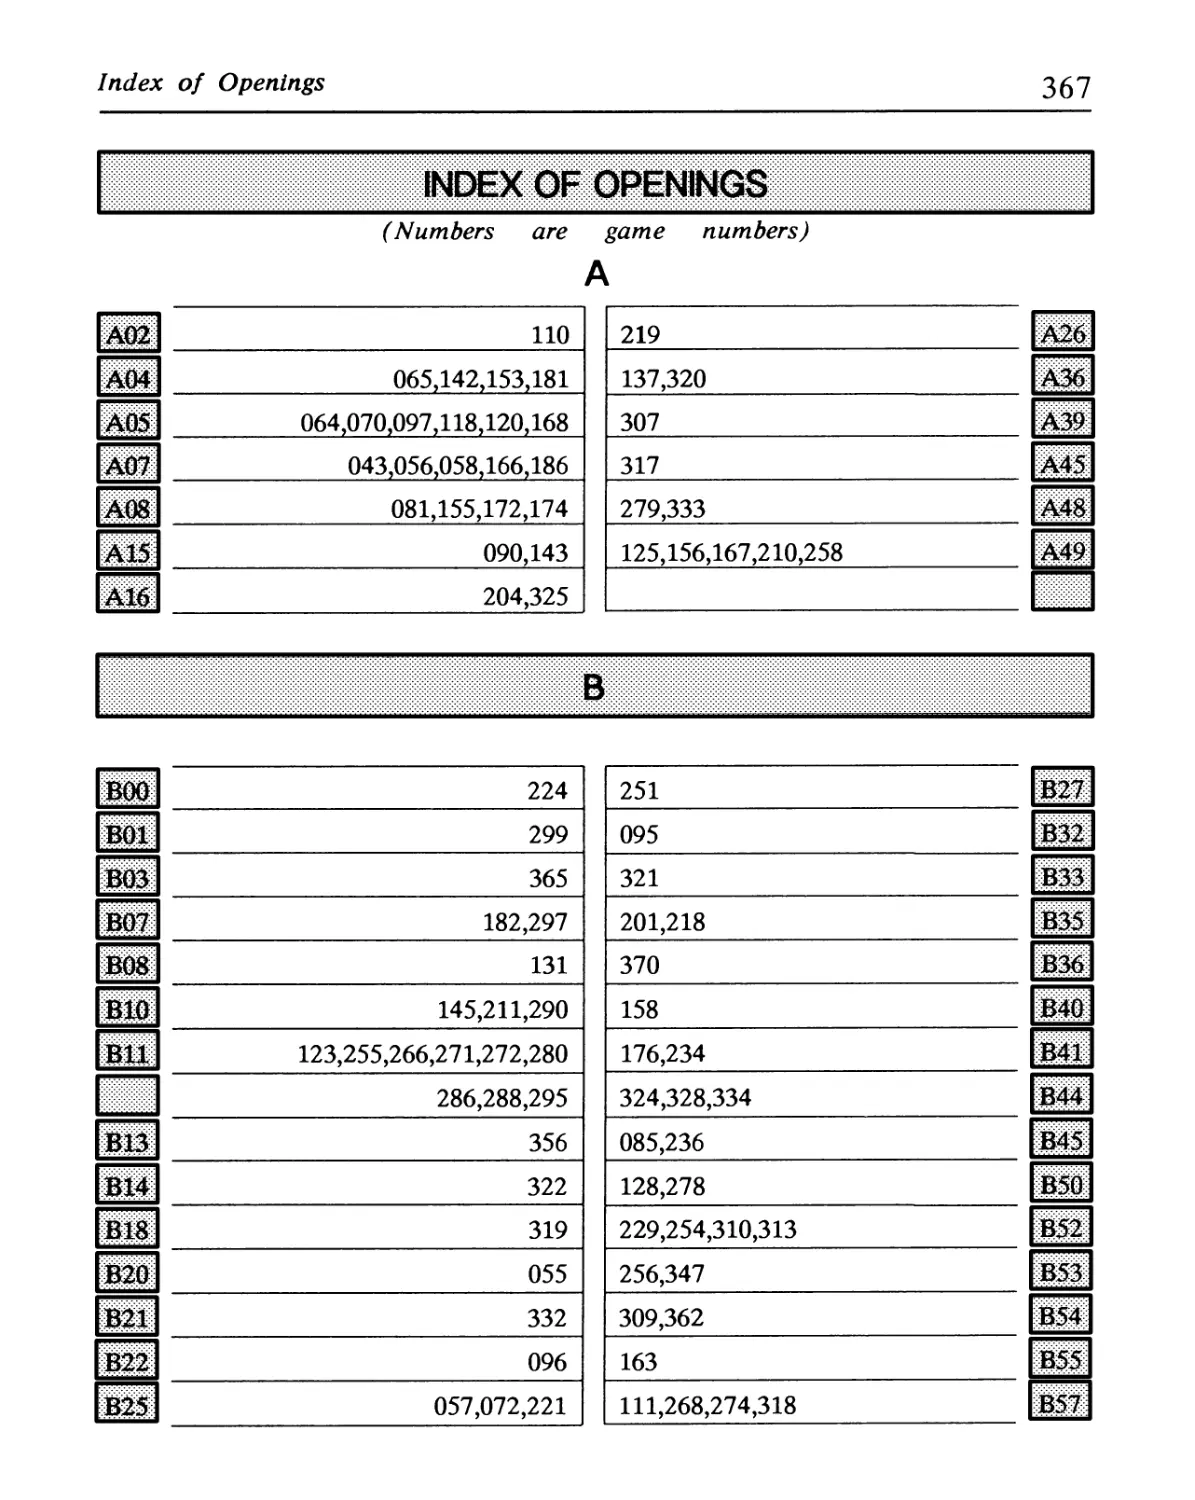 Index of Openings